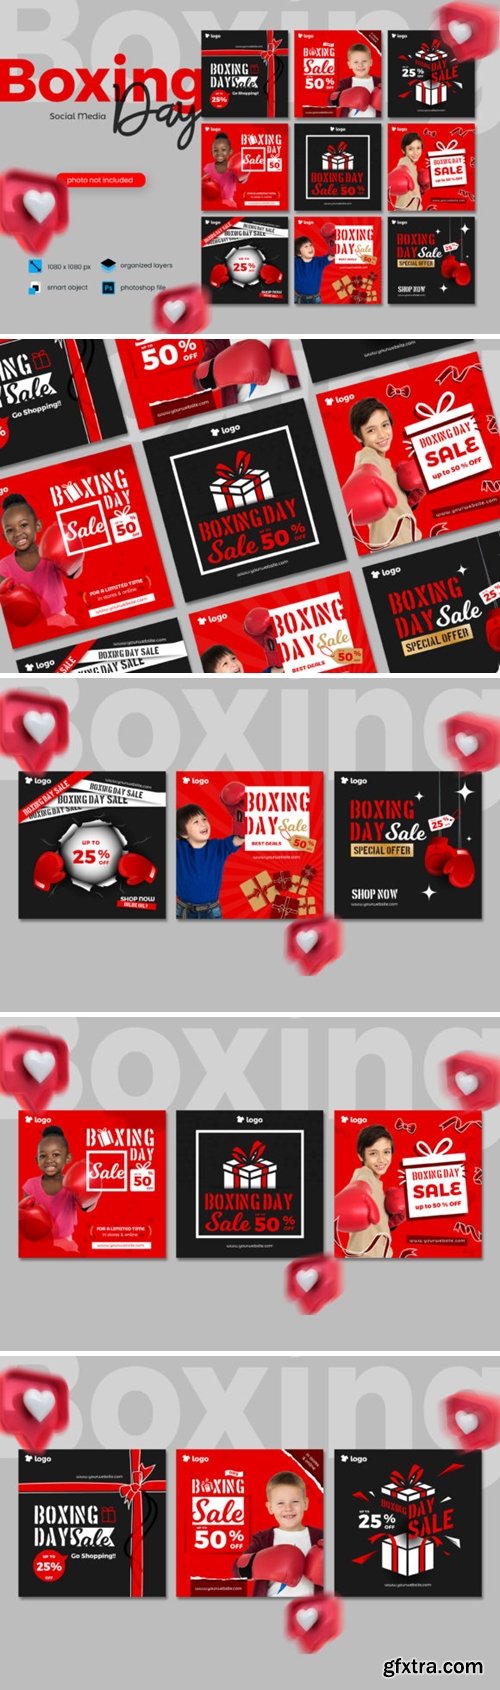 Boxing Day Sale Social Media Template 2118052